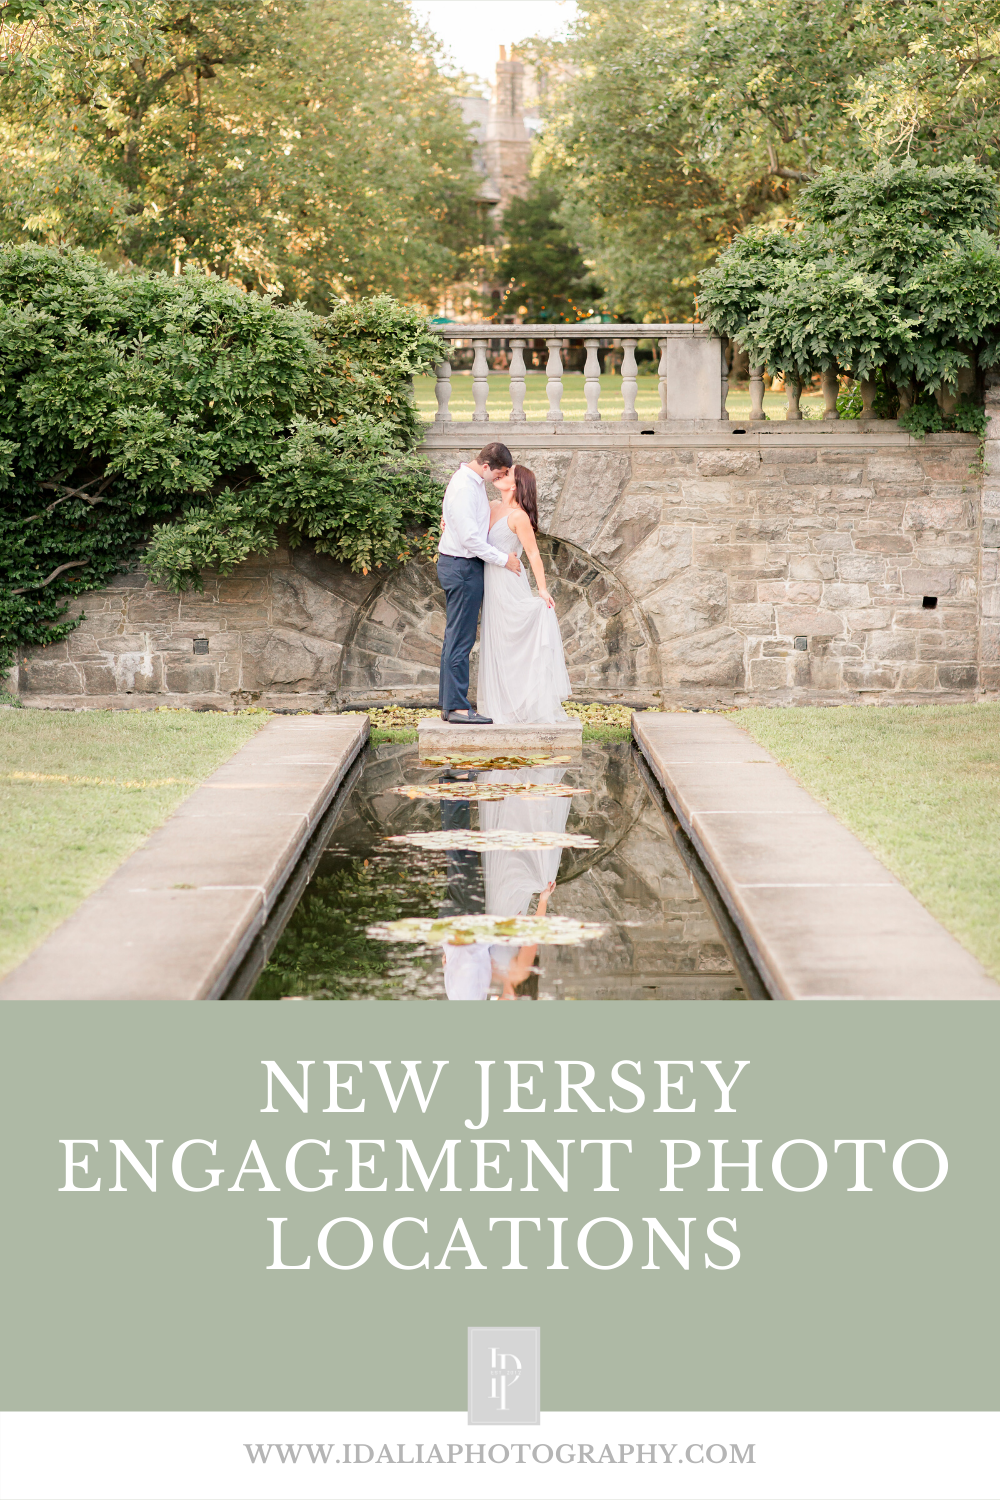 NJ Engagement Photo Locations | Where to take engagement photos in NJ